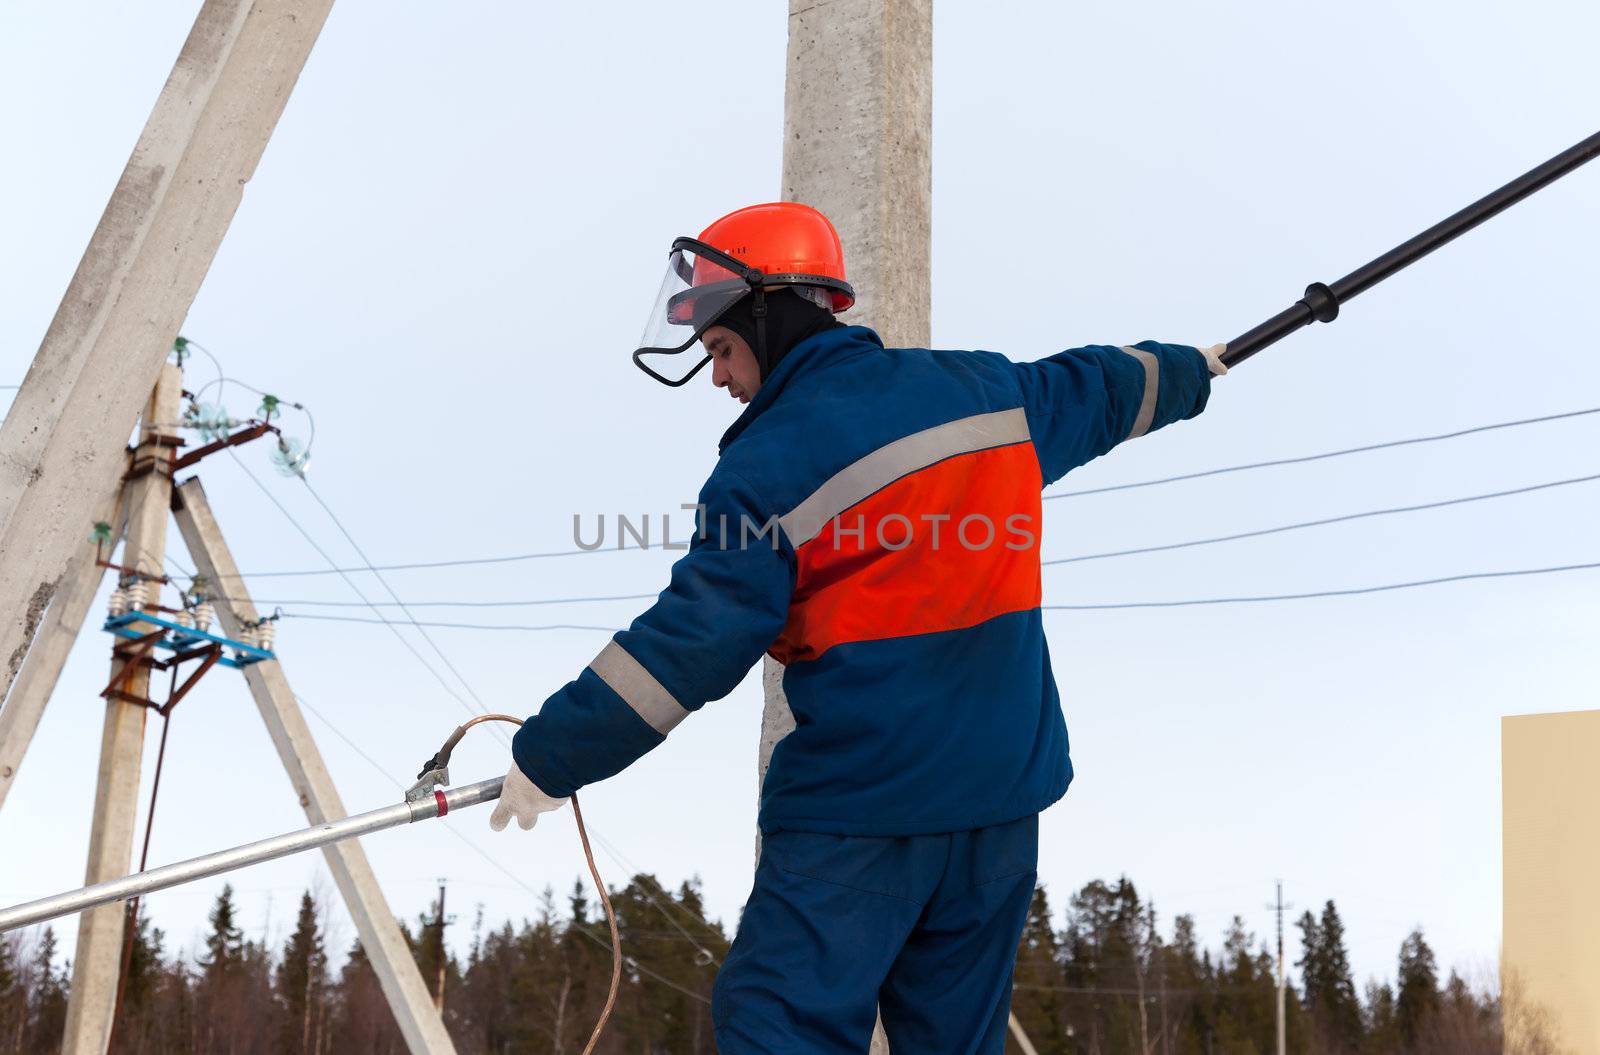 Electrician in blue overalls working on power lines